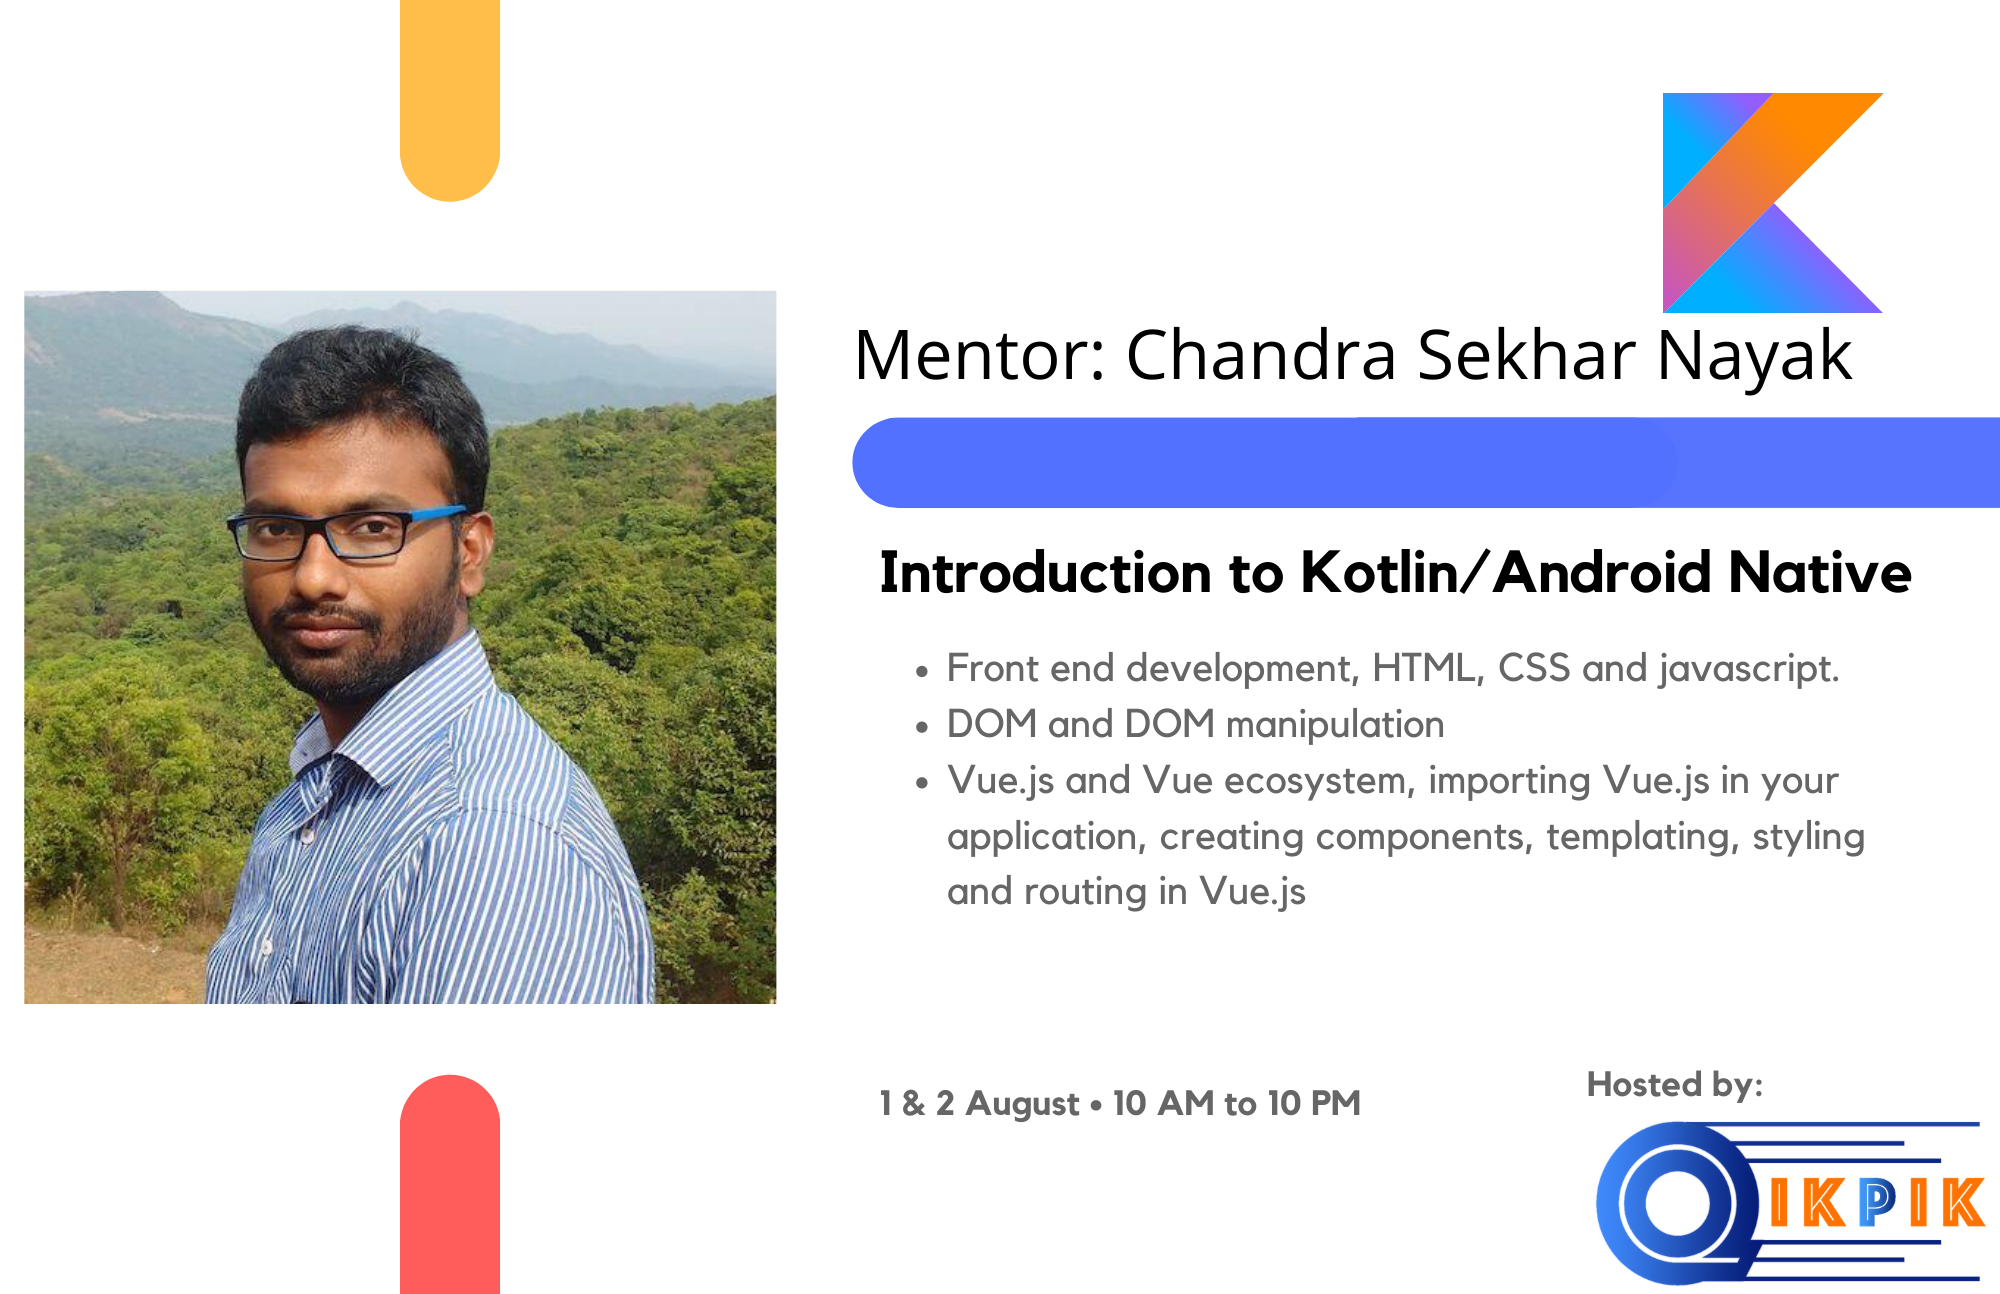 Introduction to Frontend development with Kotlin/Android